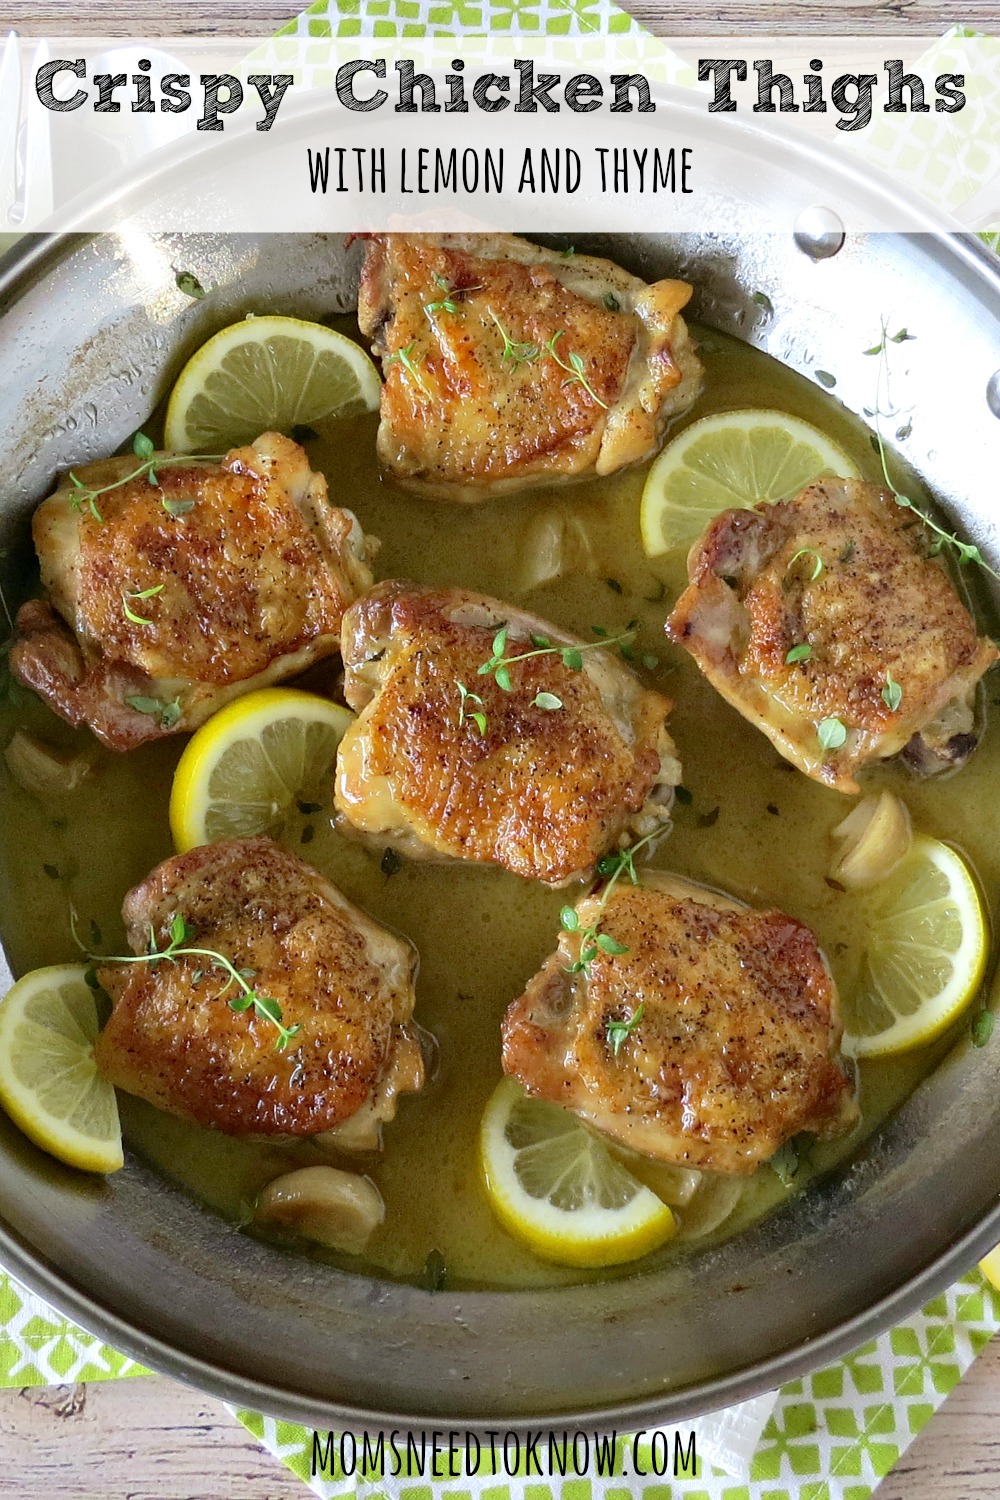 Lemon, thyme and butter make these crispy chicken thighs so moist and flavorful. Start them on the stove and finish them in the oven!